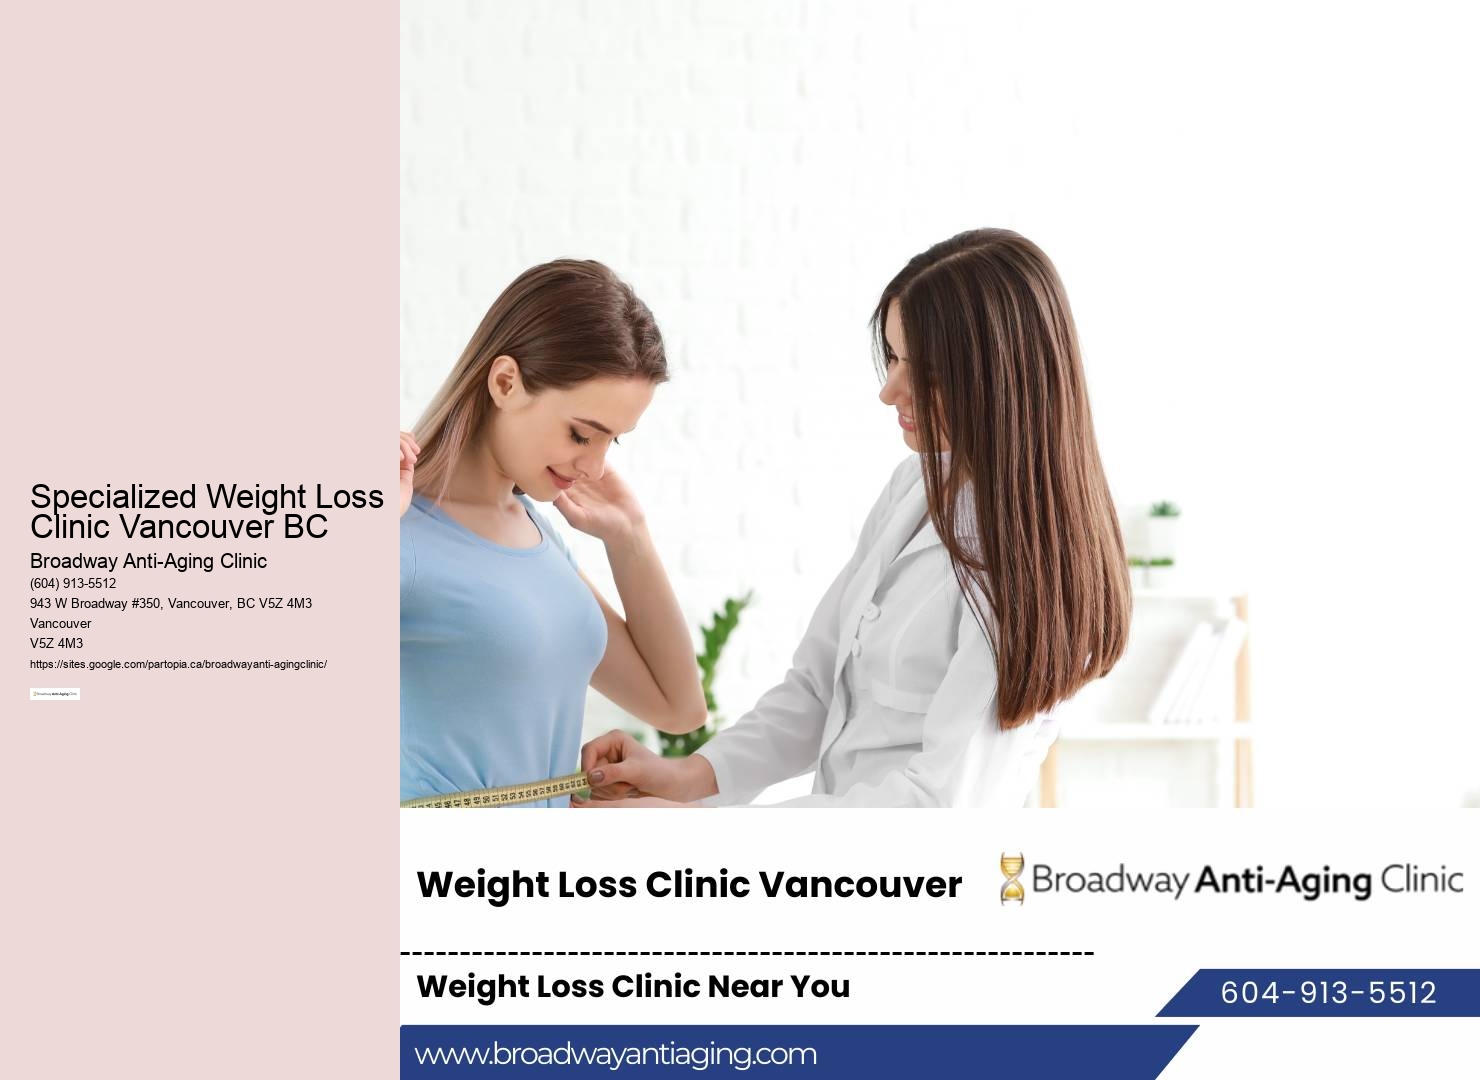 Specialized Weight Loss Clinic Vancouver BC